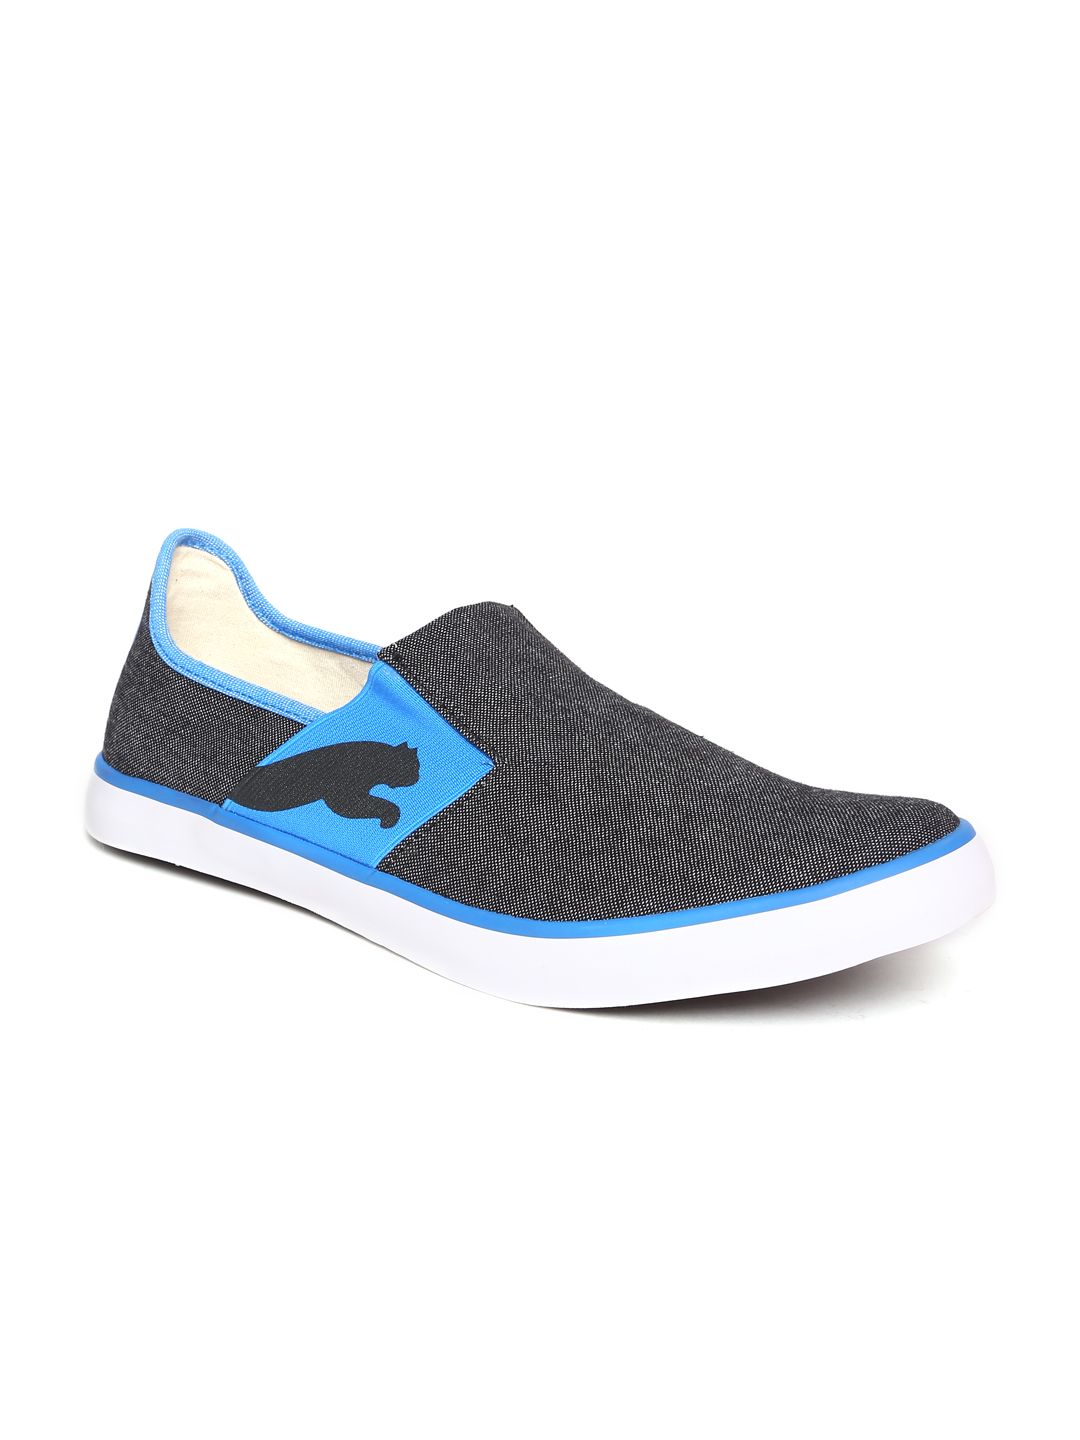 puma loafers online india